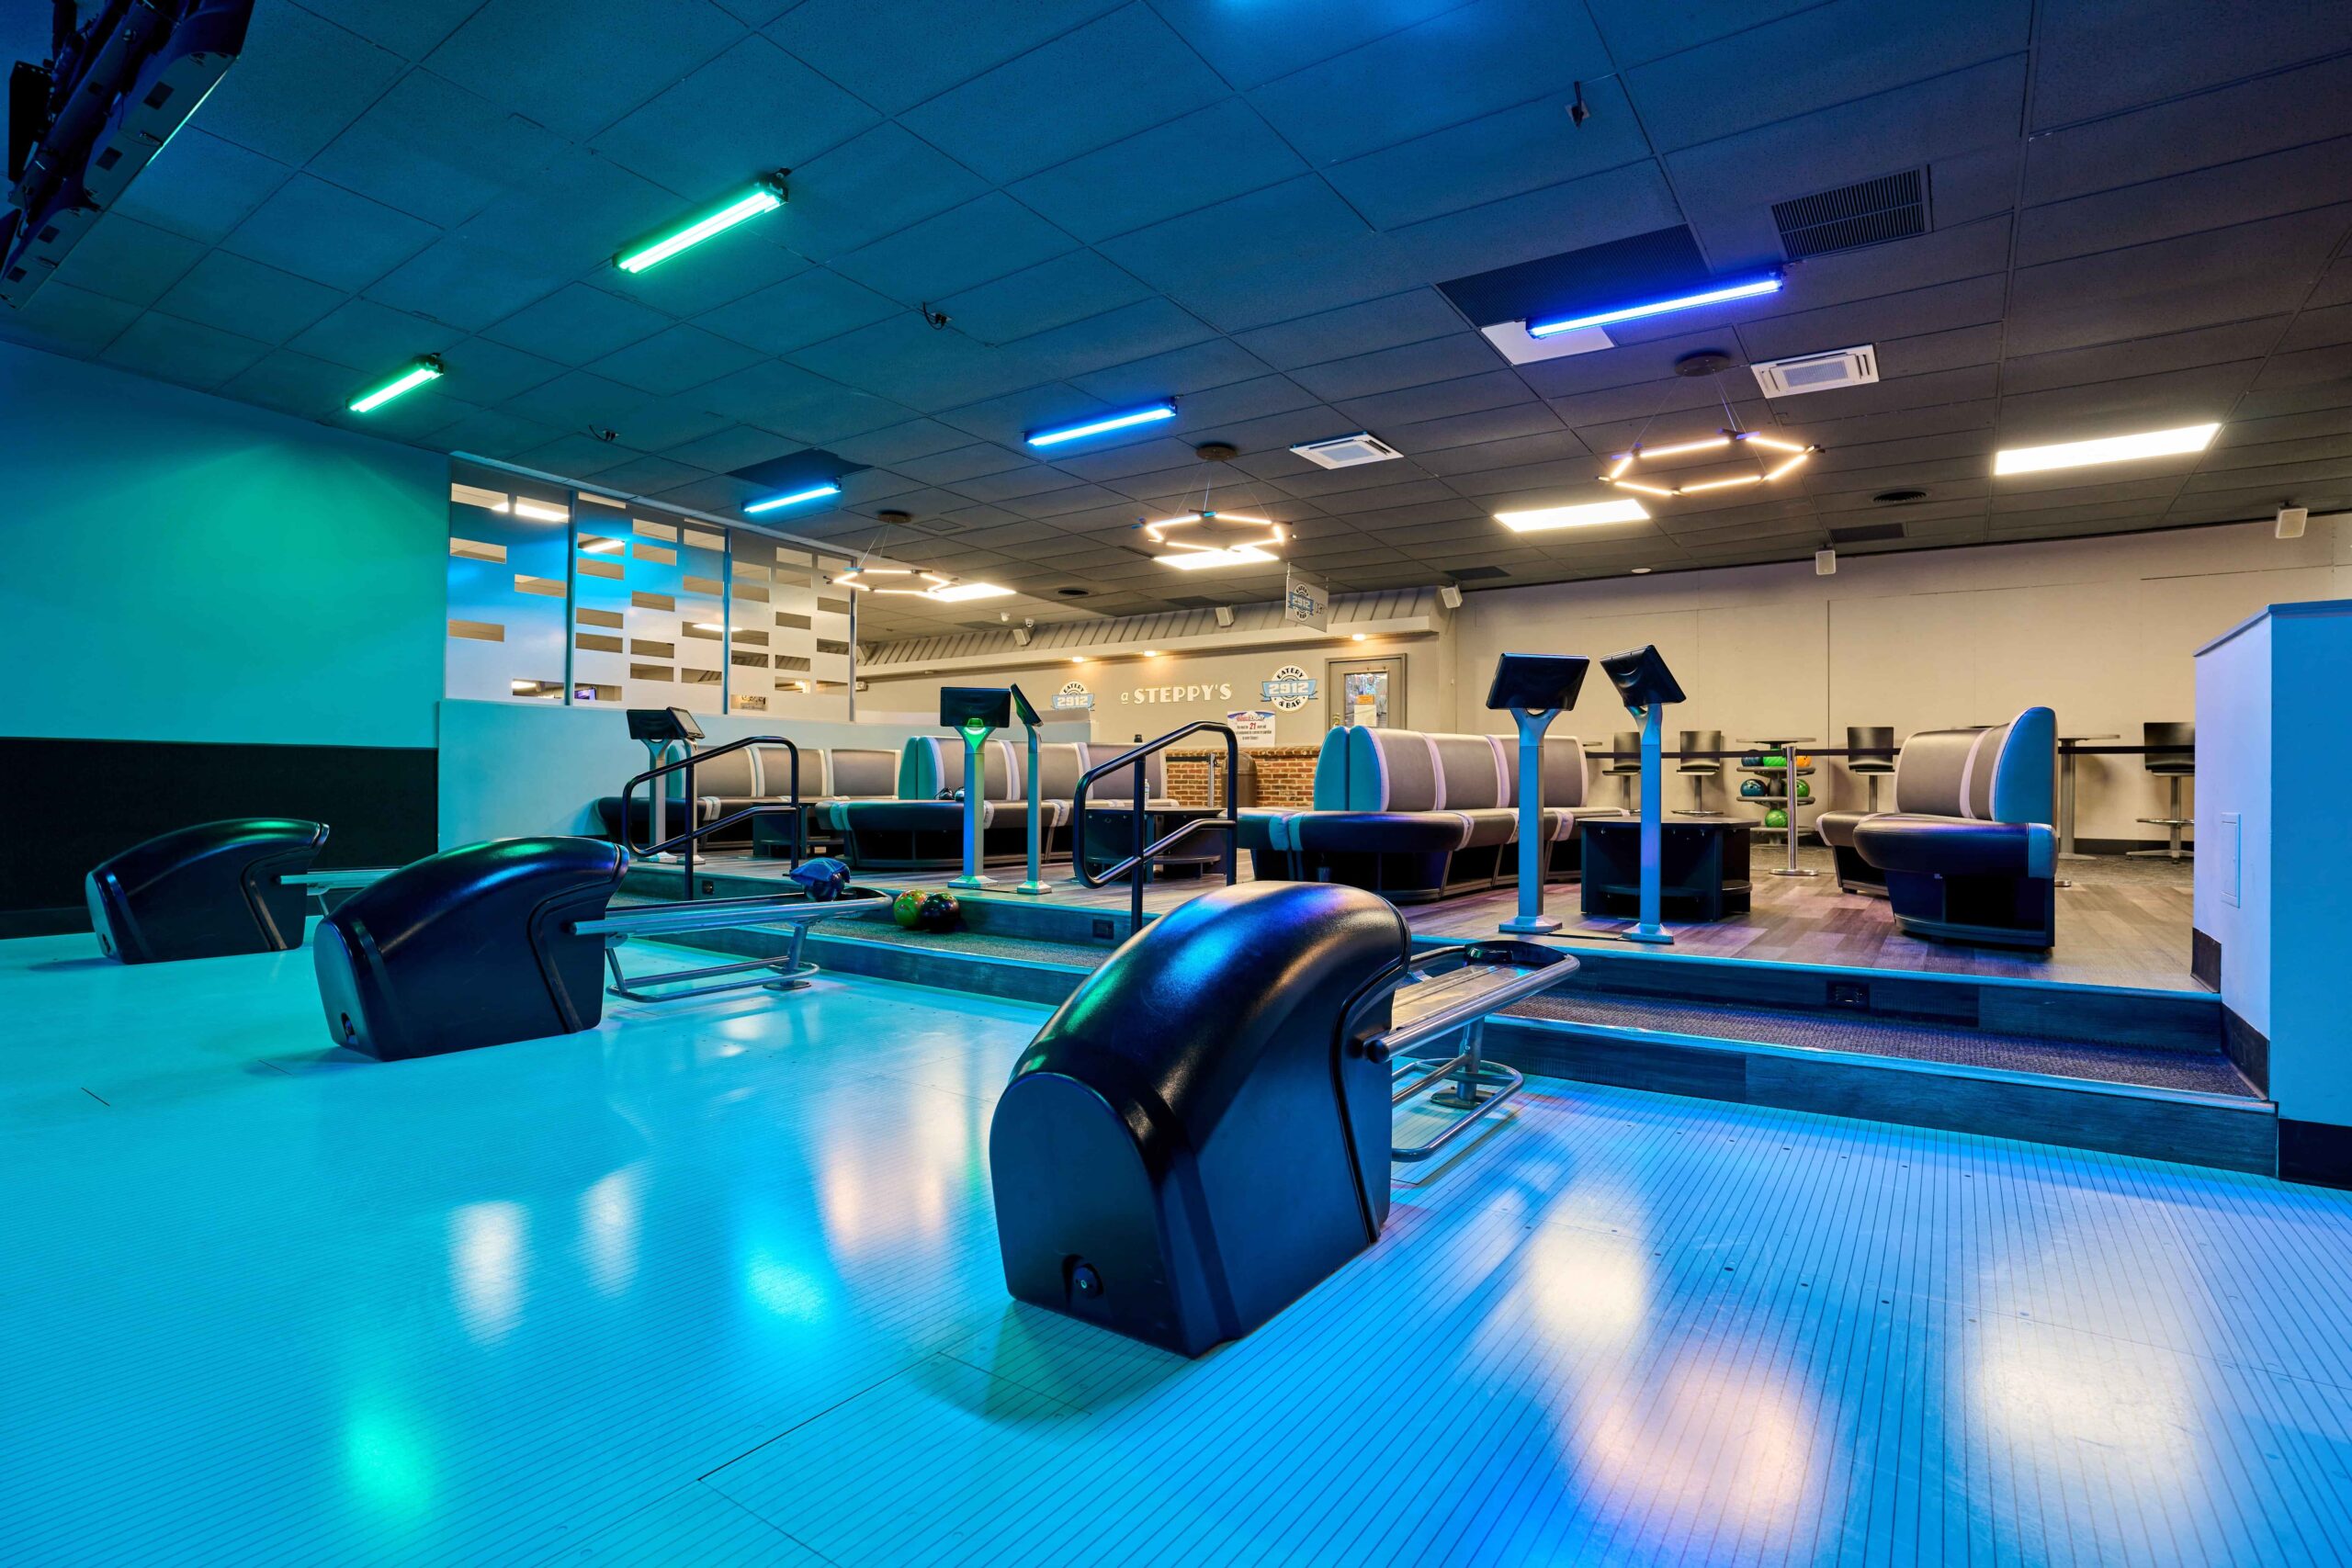 Striking Celebrations: Top 10 Reasons to Host Your Kid’s Birthday Party at the Bowling Alley!